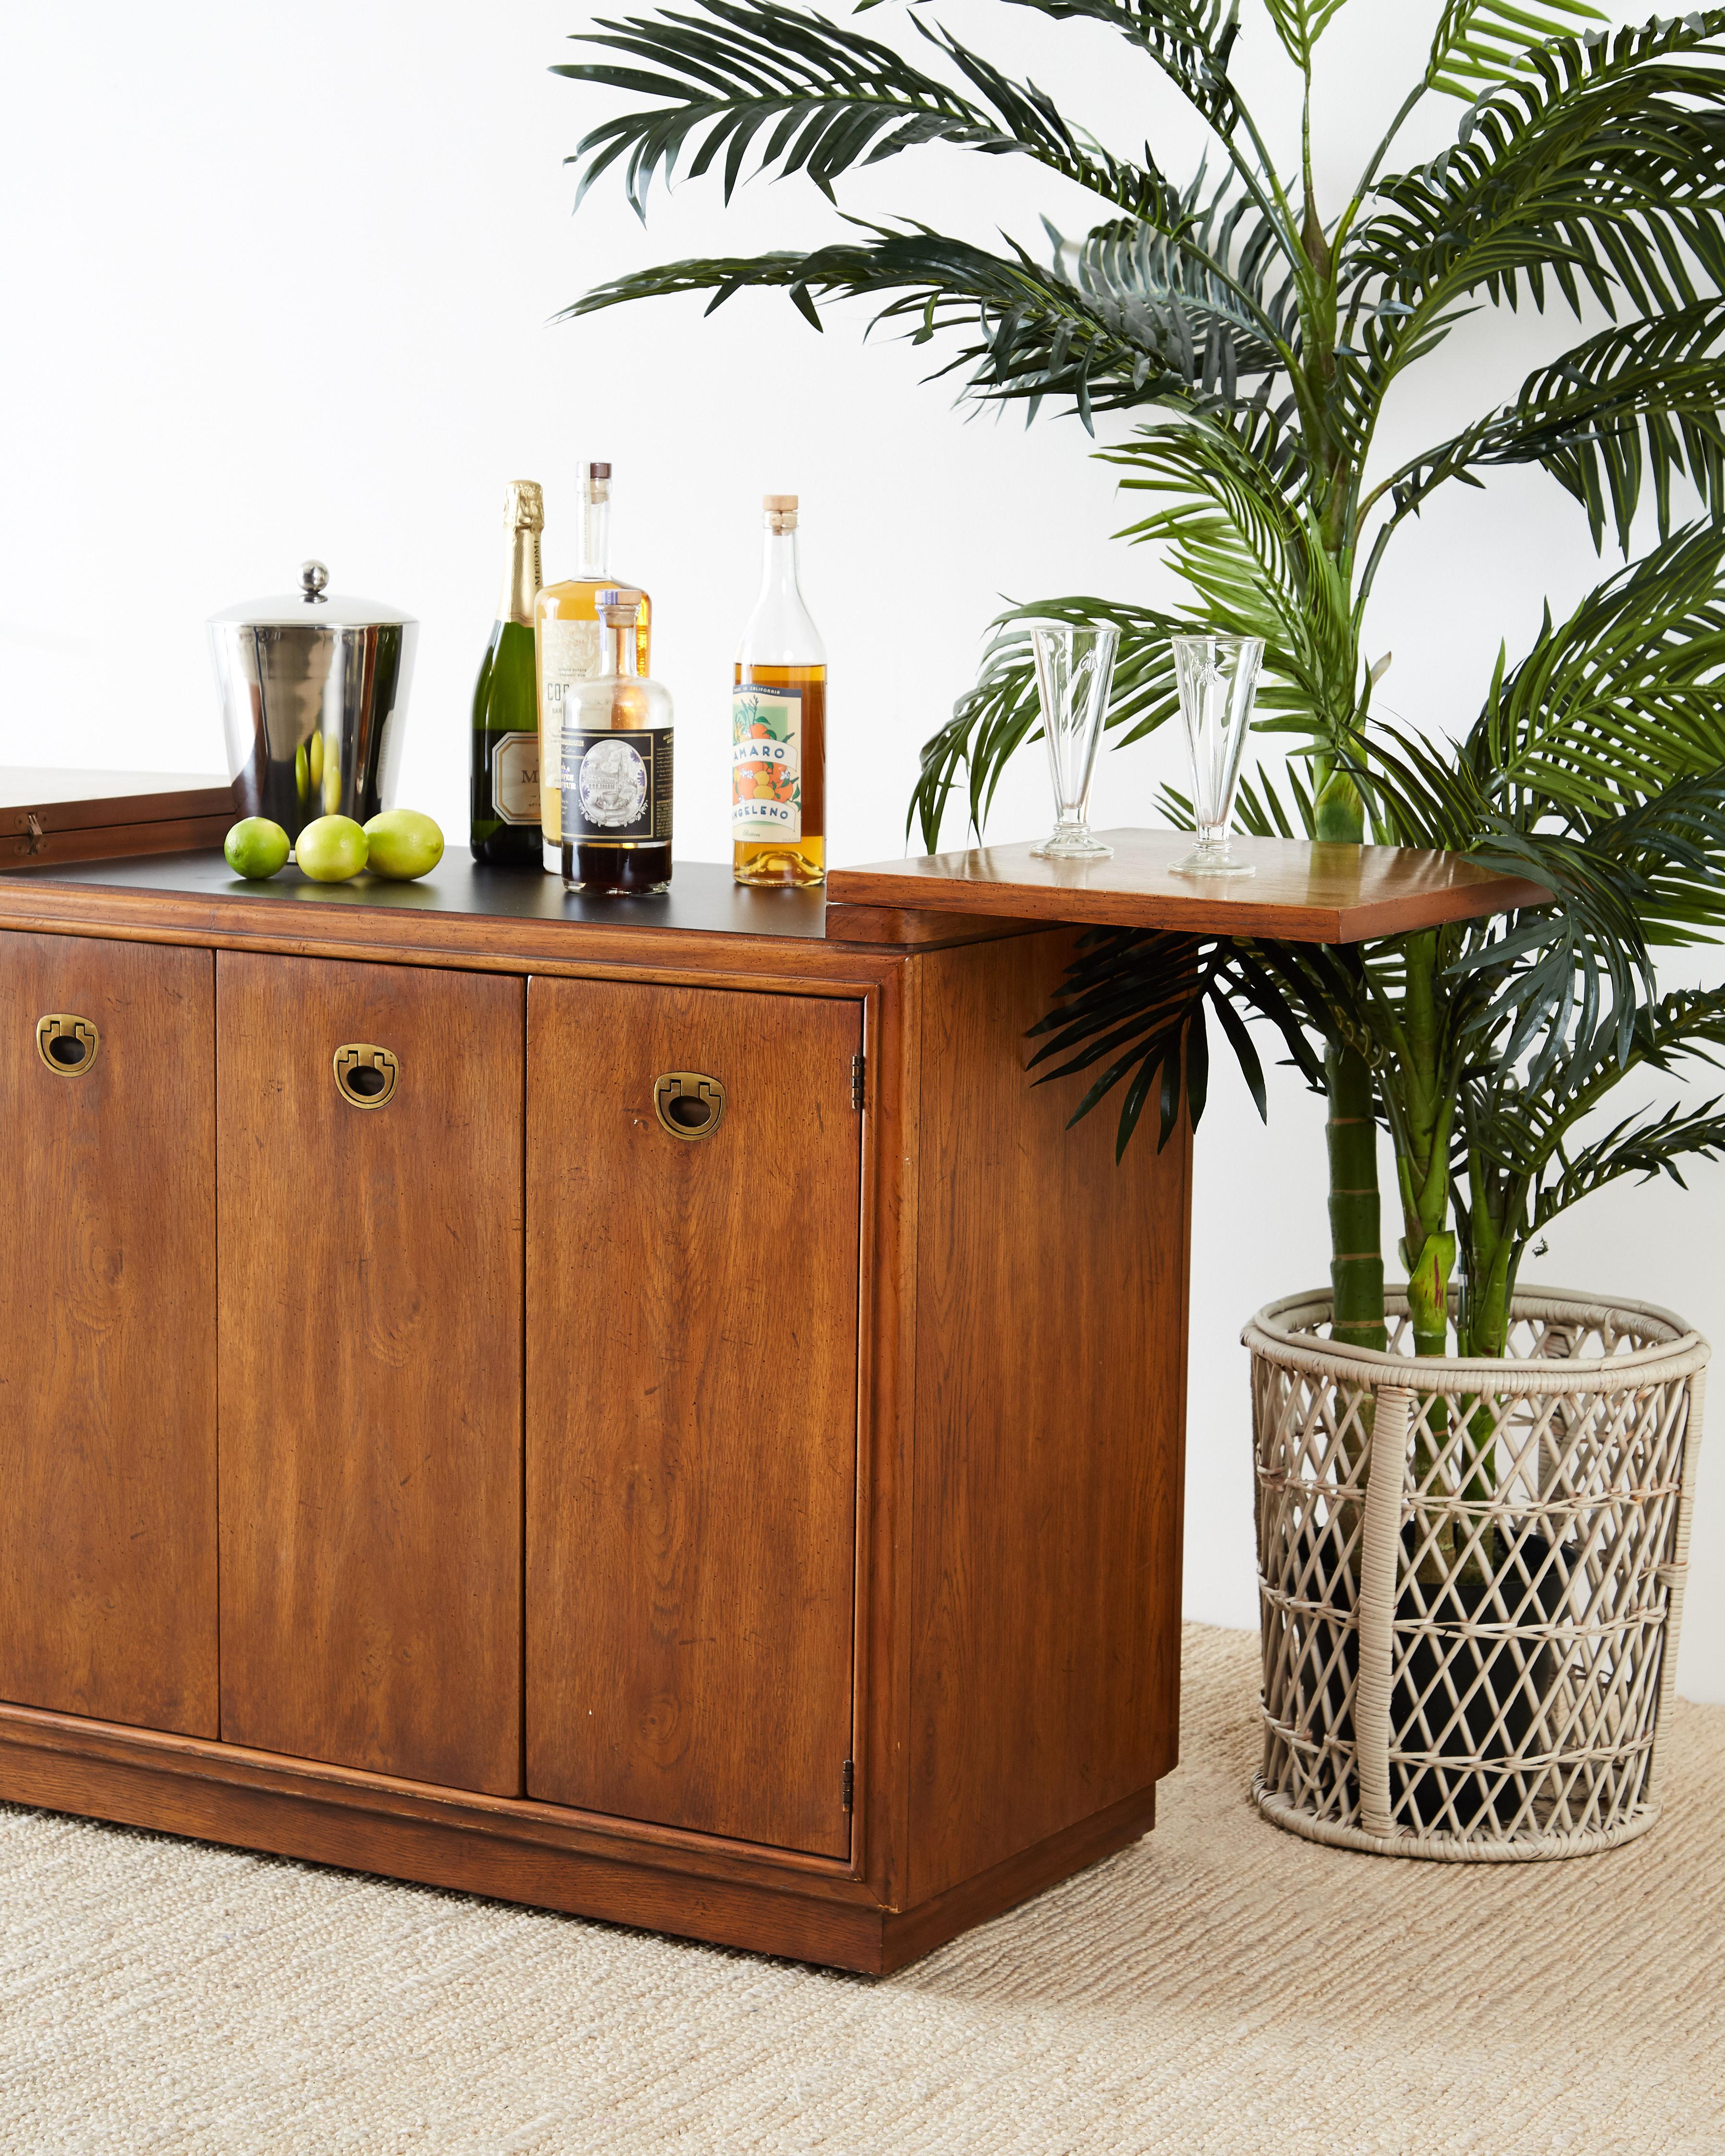 Fabulous midcentury rolling bar cart, dry bar or server by Drexel. Constructed from beautifully grained walnut and finished on all sides. Made in the Campaign style with a flip topextending top which reveals a formica black work surface. Three doors